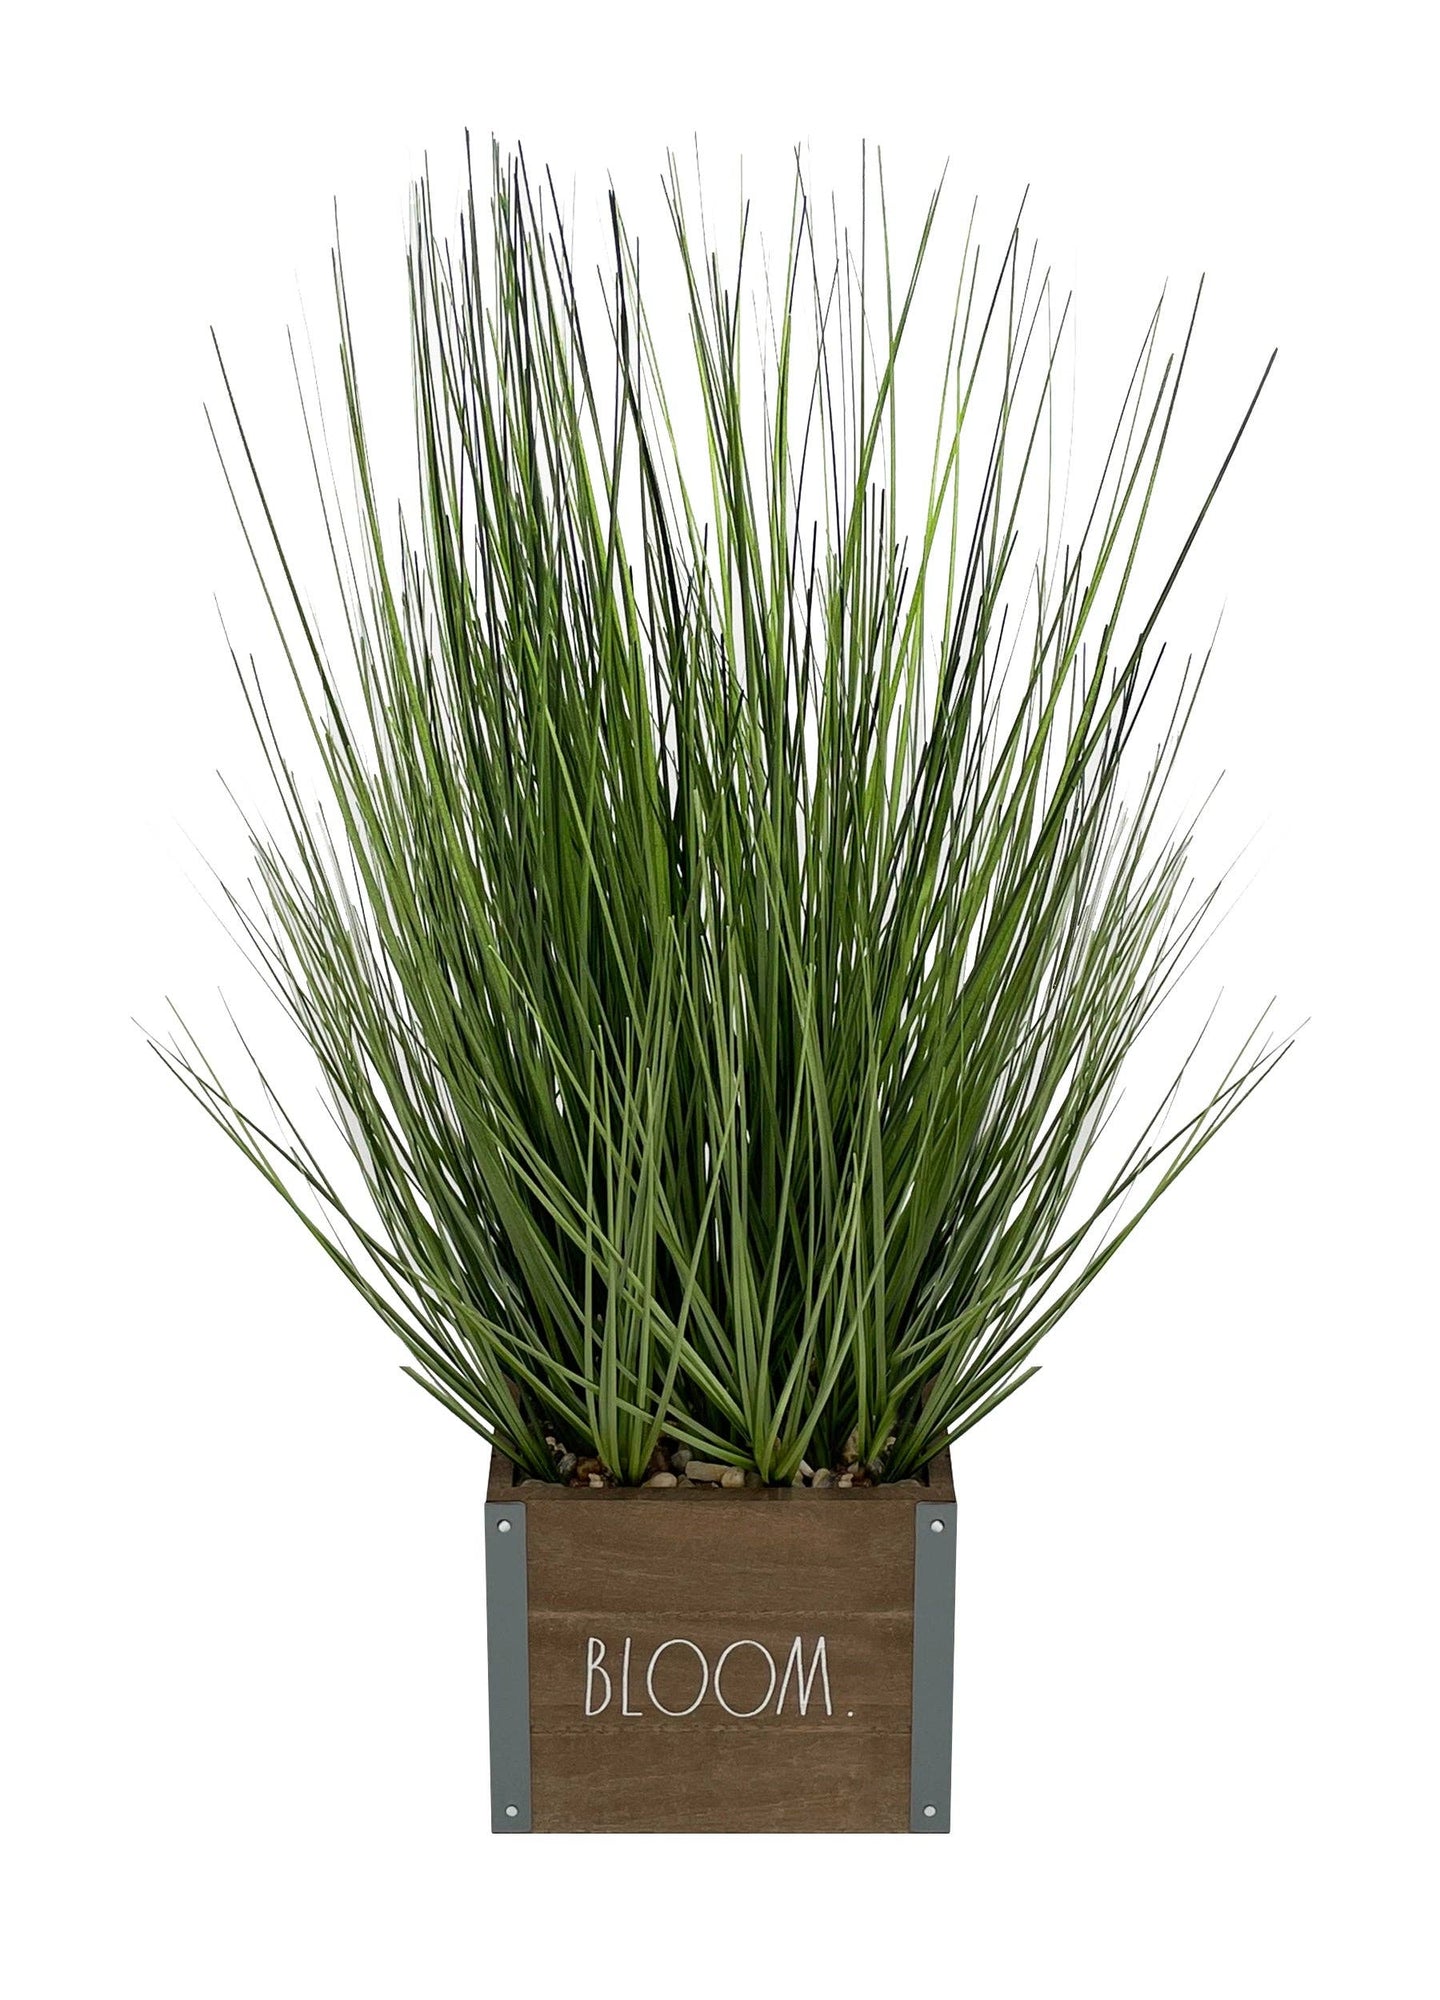 Rae Dunn “Bloom” Artificial Grass Plants with Wooden Planter